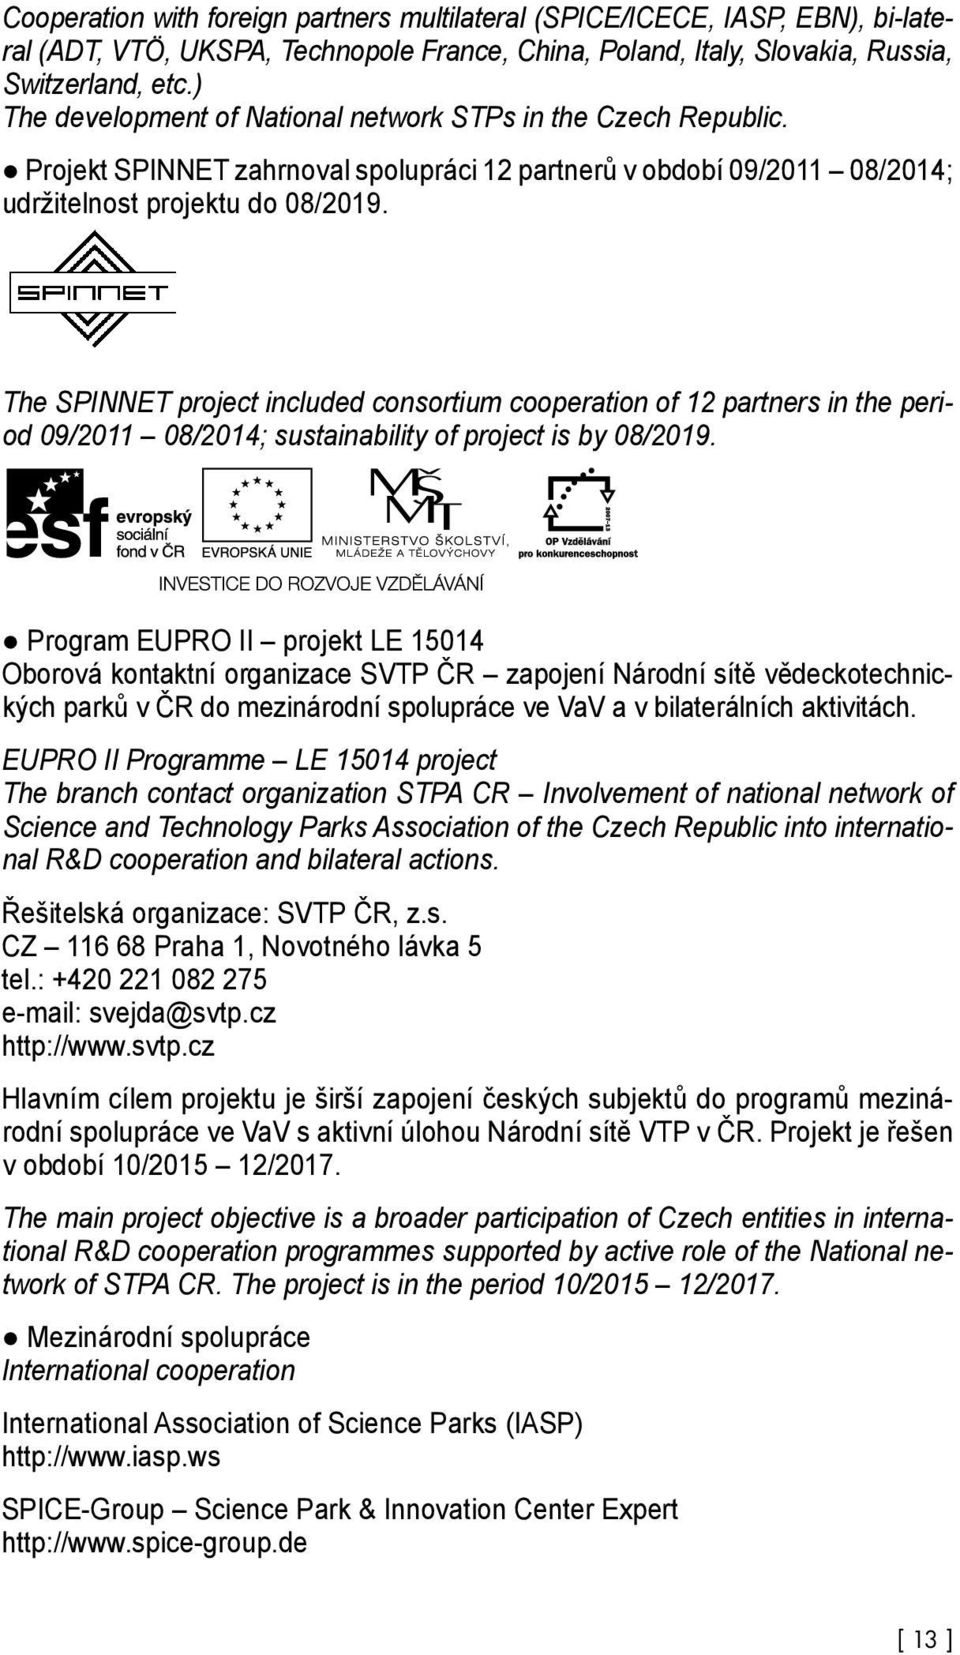 The SPINNET project included consortium cooperation of 12 partners in the period 09/2011 08/2014; sustainability of project is by 08/2019.